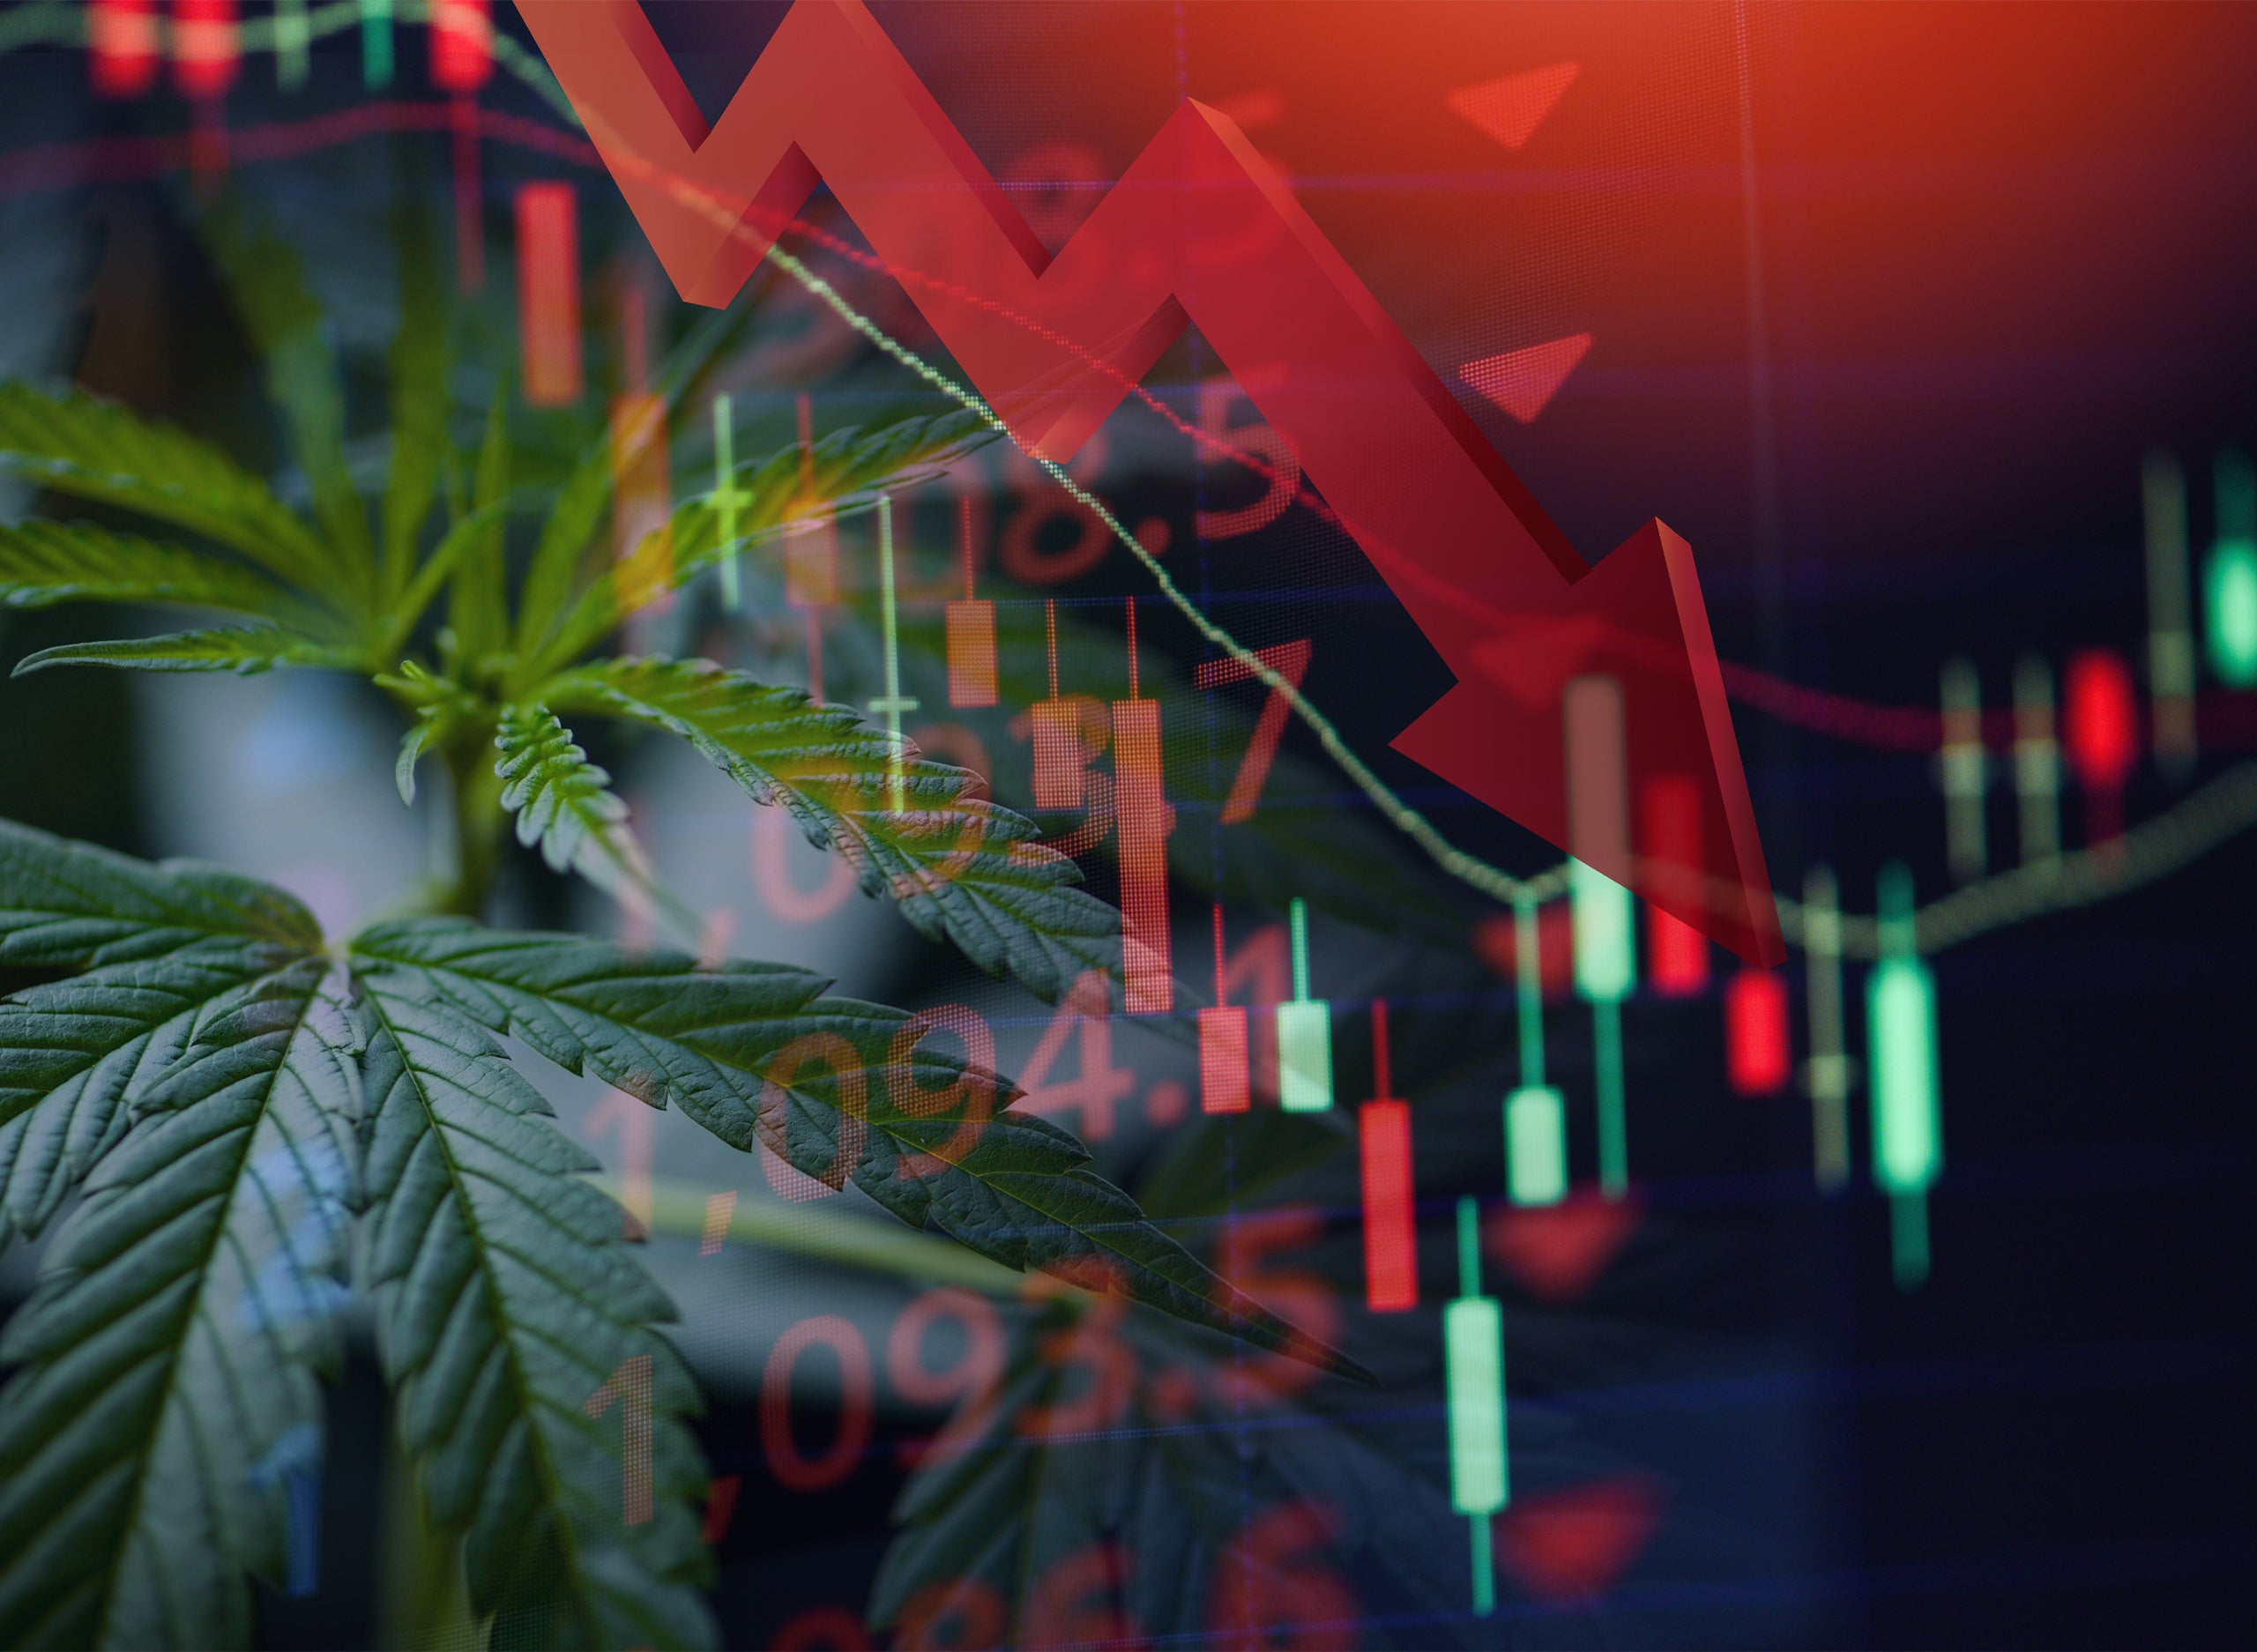 Financial Restatements By Cannabis Firms Indicate The Market Is Still Maturing According To Industry Experts